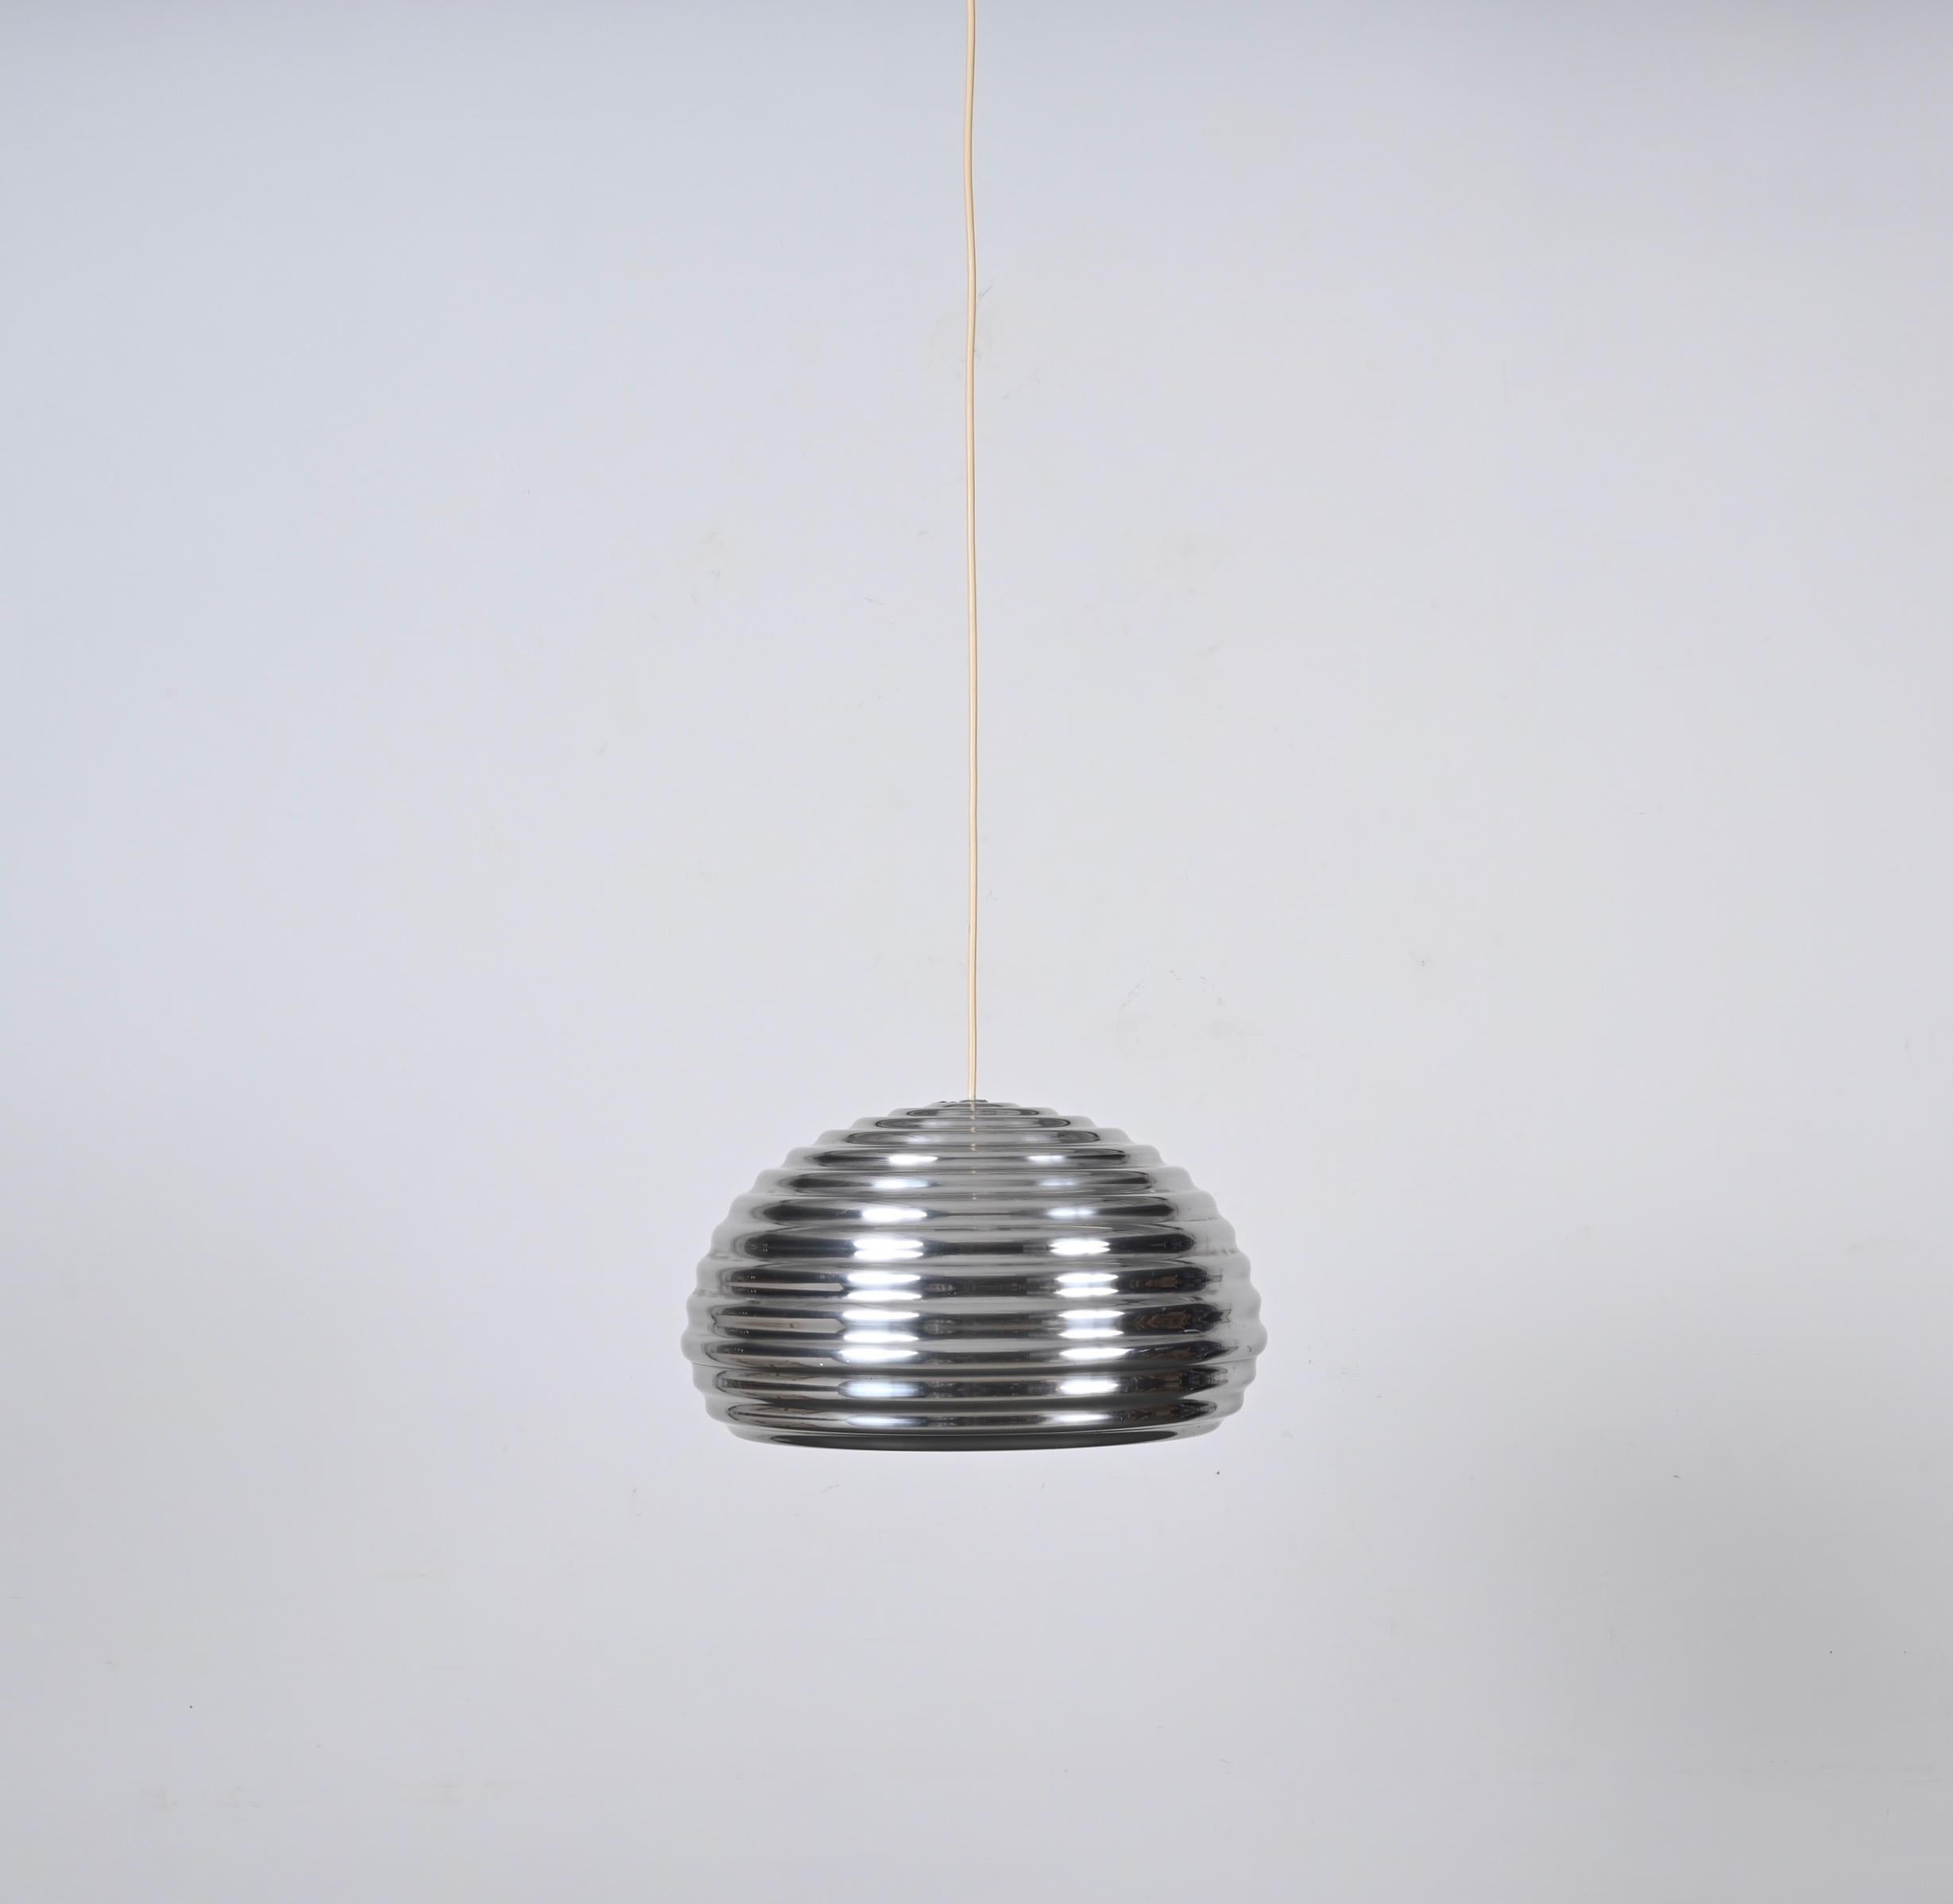 Vintage Flos Splugen Brau Pendant by Achille Castiglioni for Flos, Italy 1961 In Good Condition For Sale In Roma, IT